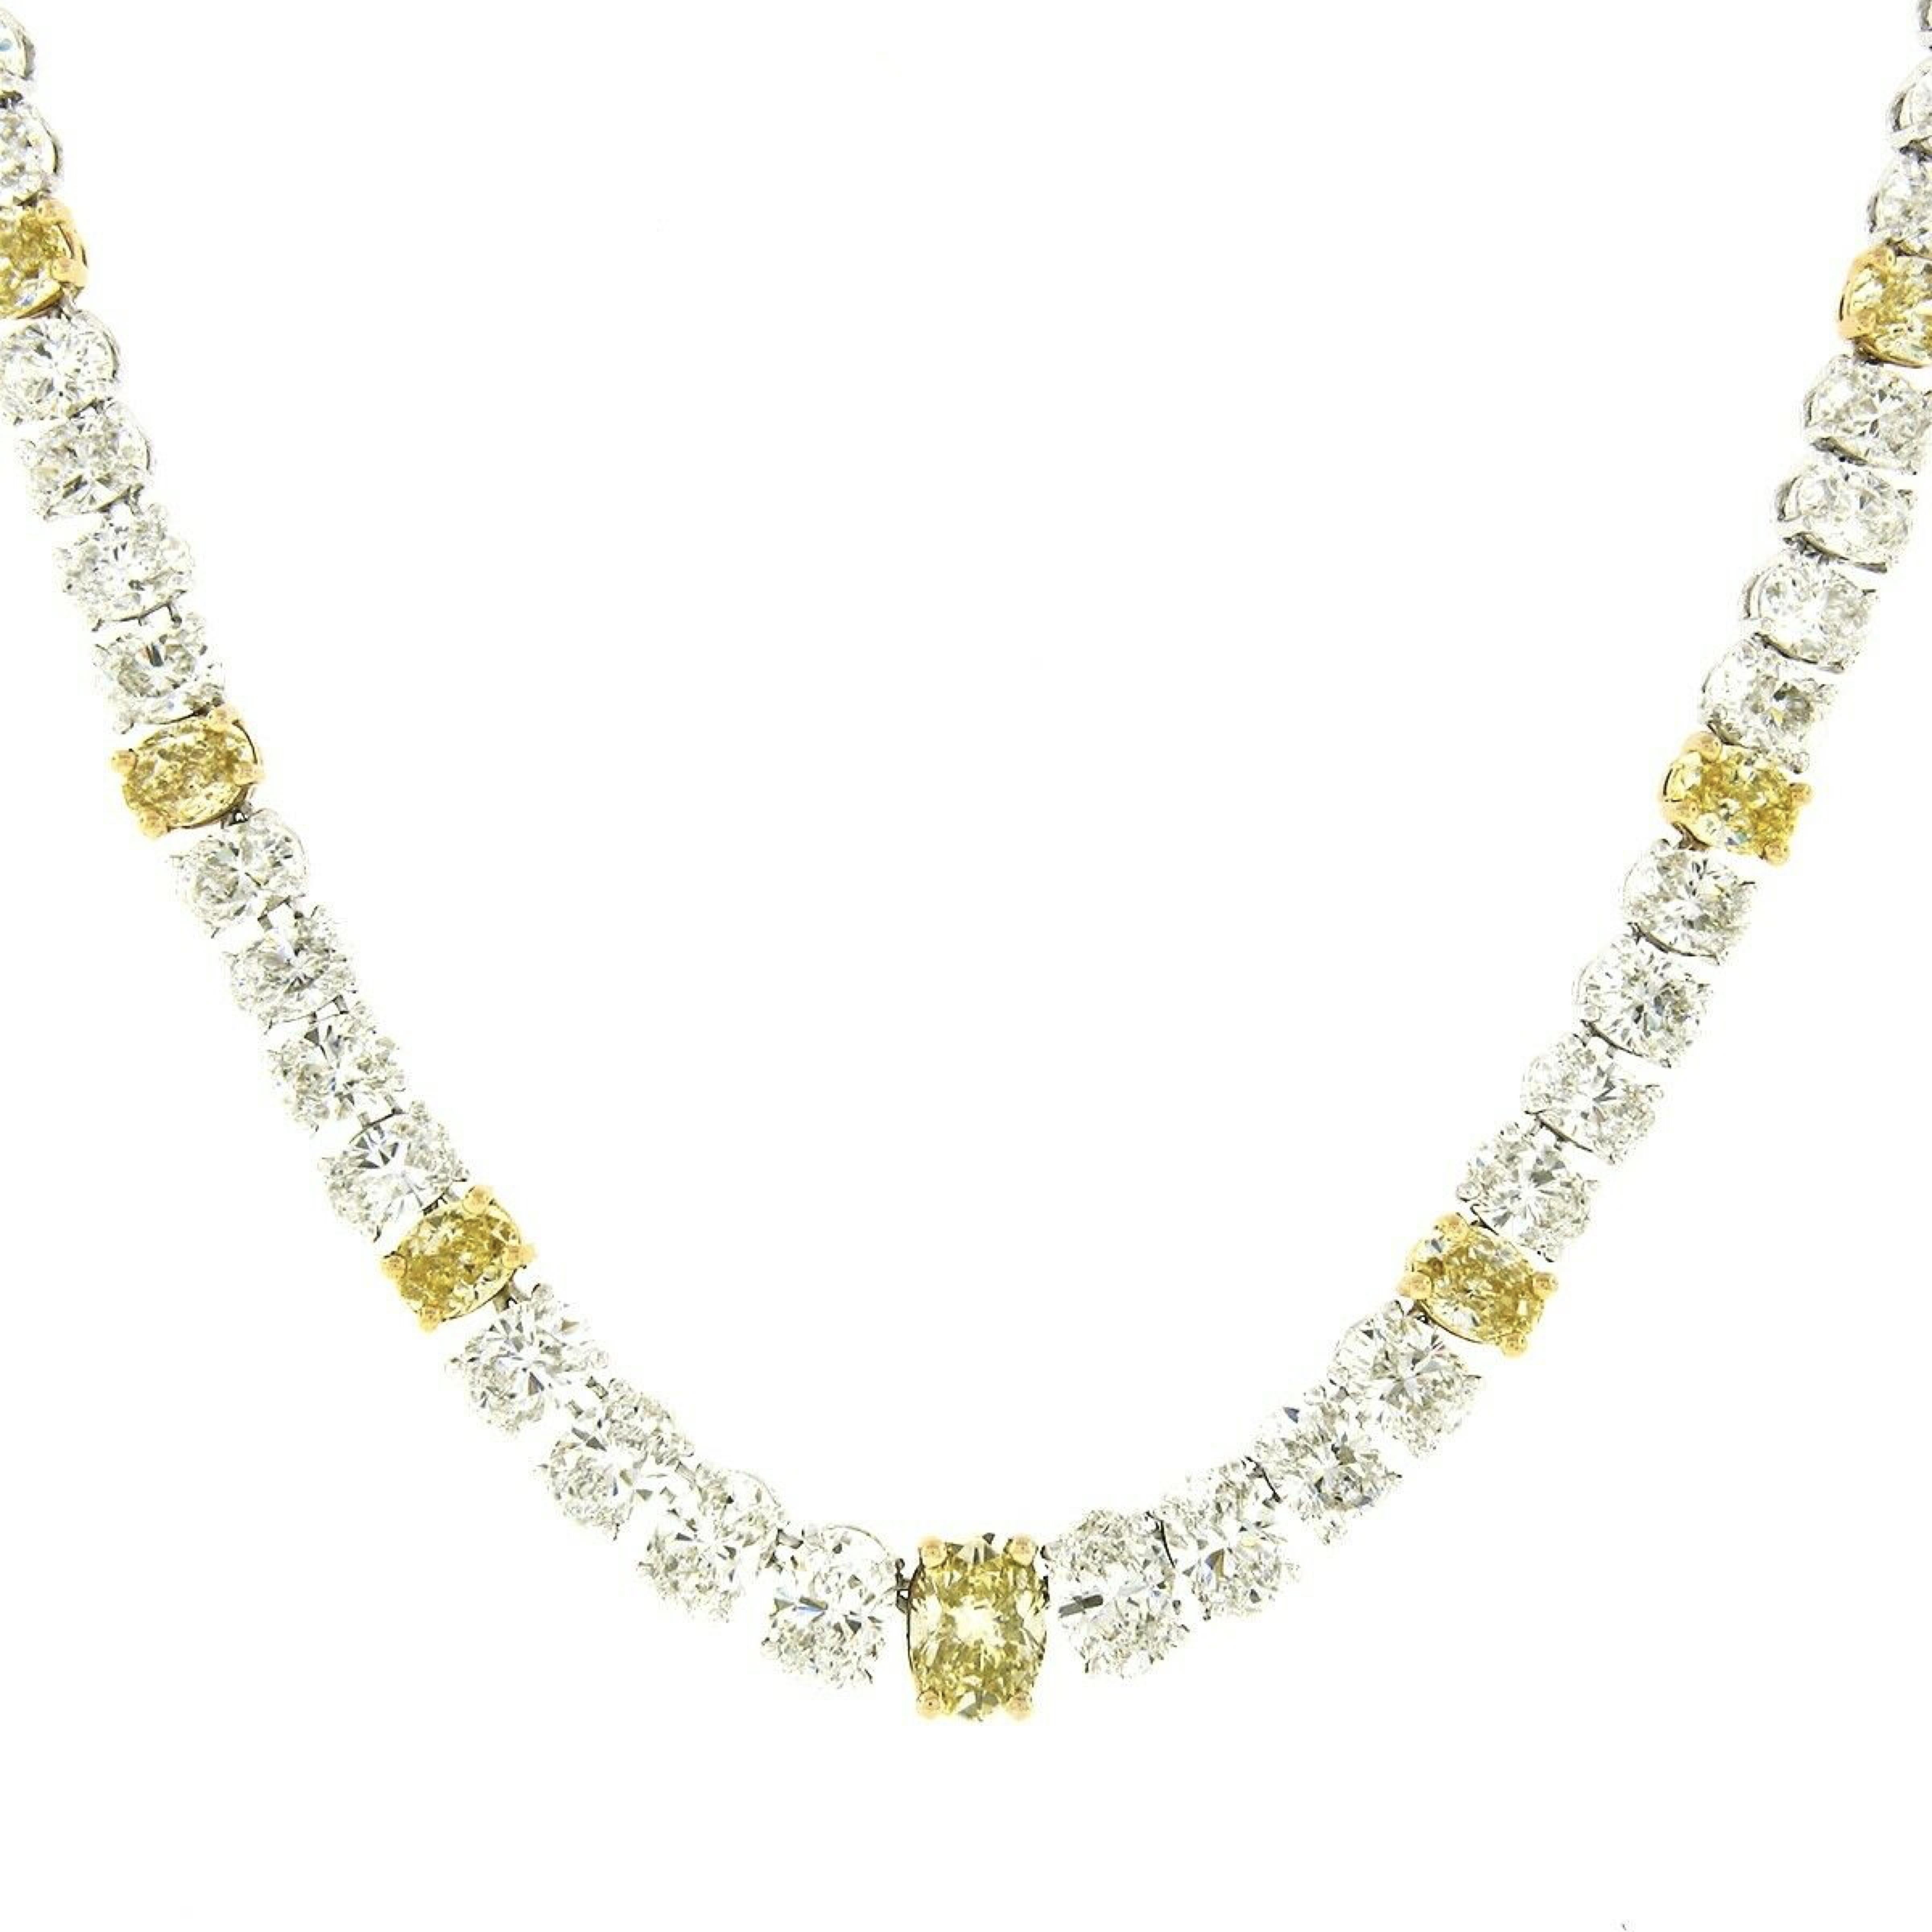 Offering this absolutely stunning diamond tennis necklace that is designed by Oscar Heyman and crafted in solid platinum and 18k yellow gold, featuring 95 fine quality and slightly graduated oval brilliant cut diamonds throughout. The diamonds are